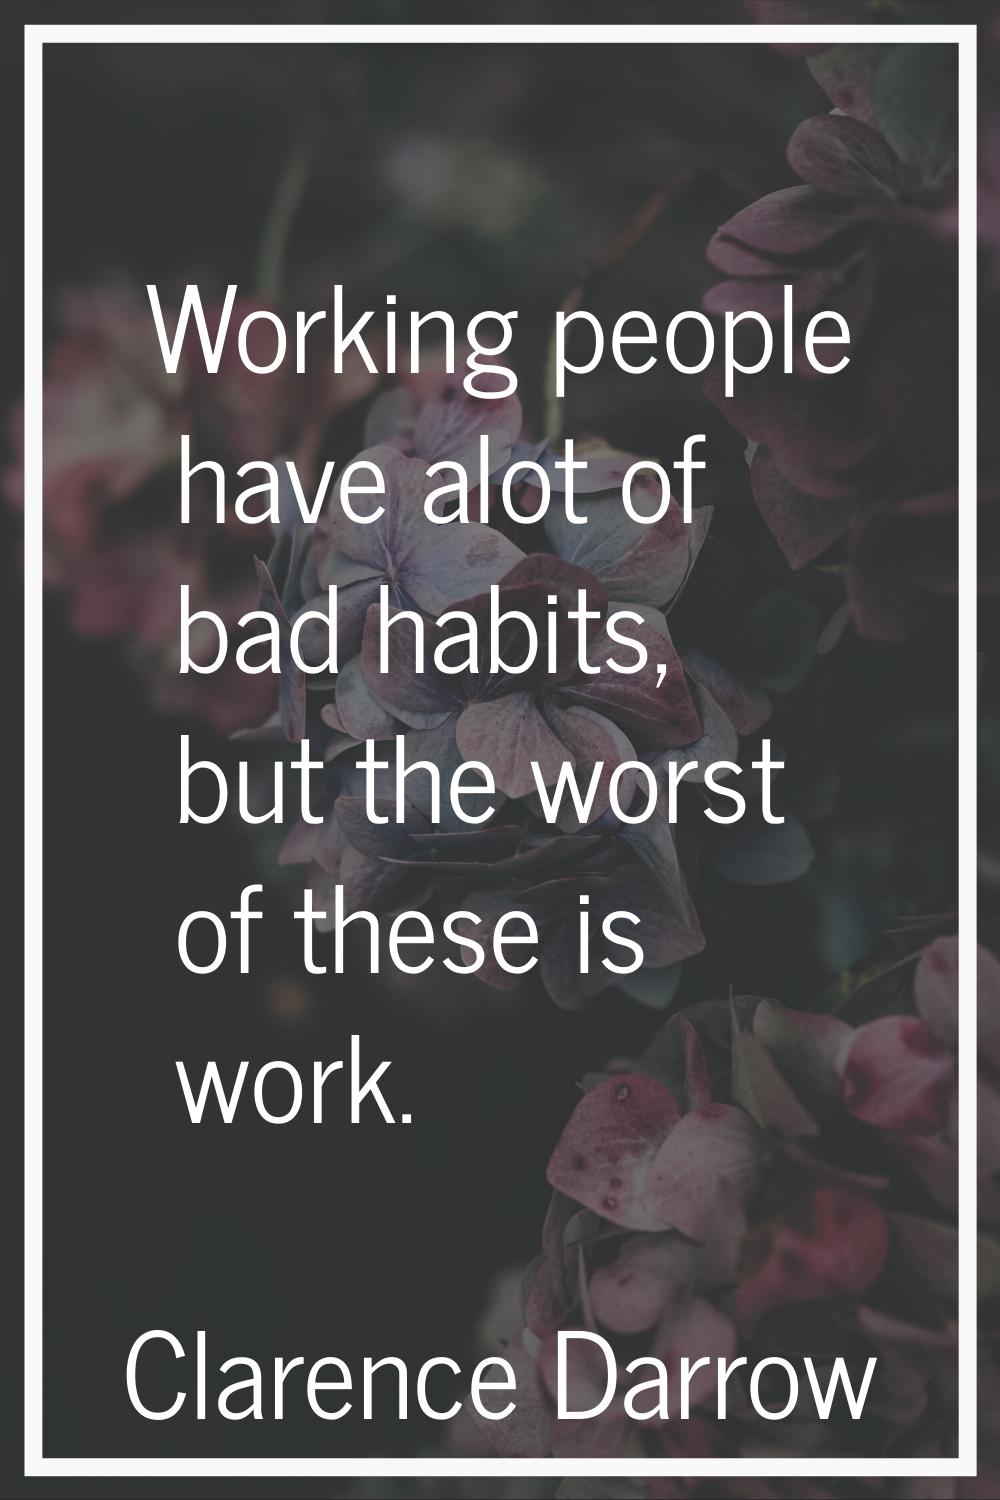 Working people have alot of bad habits, but the worst of these is work.